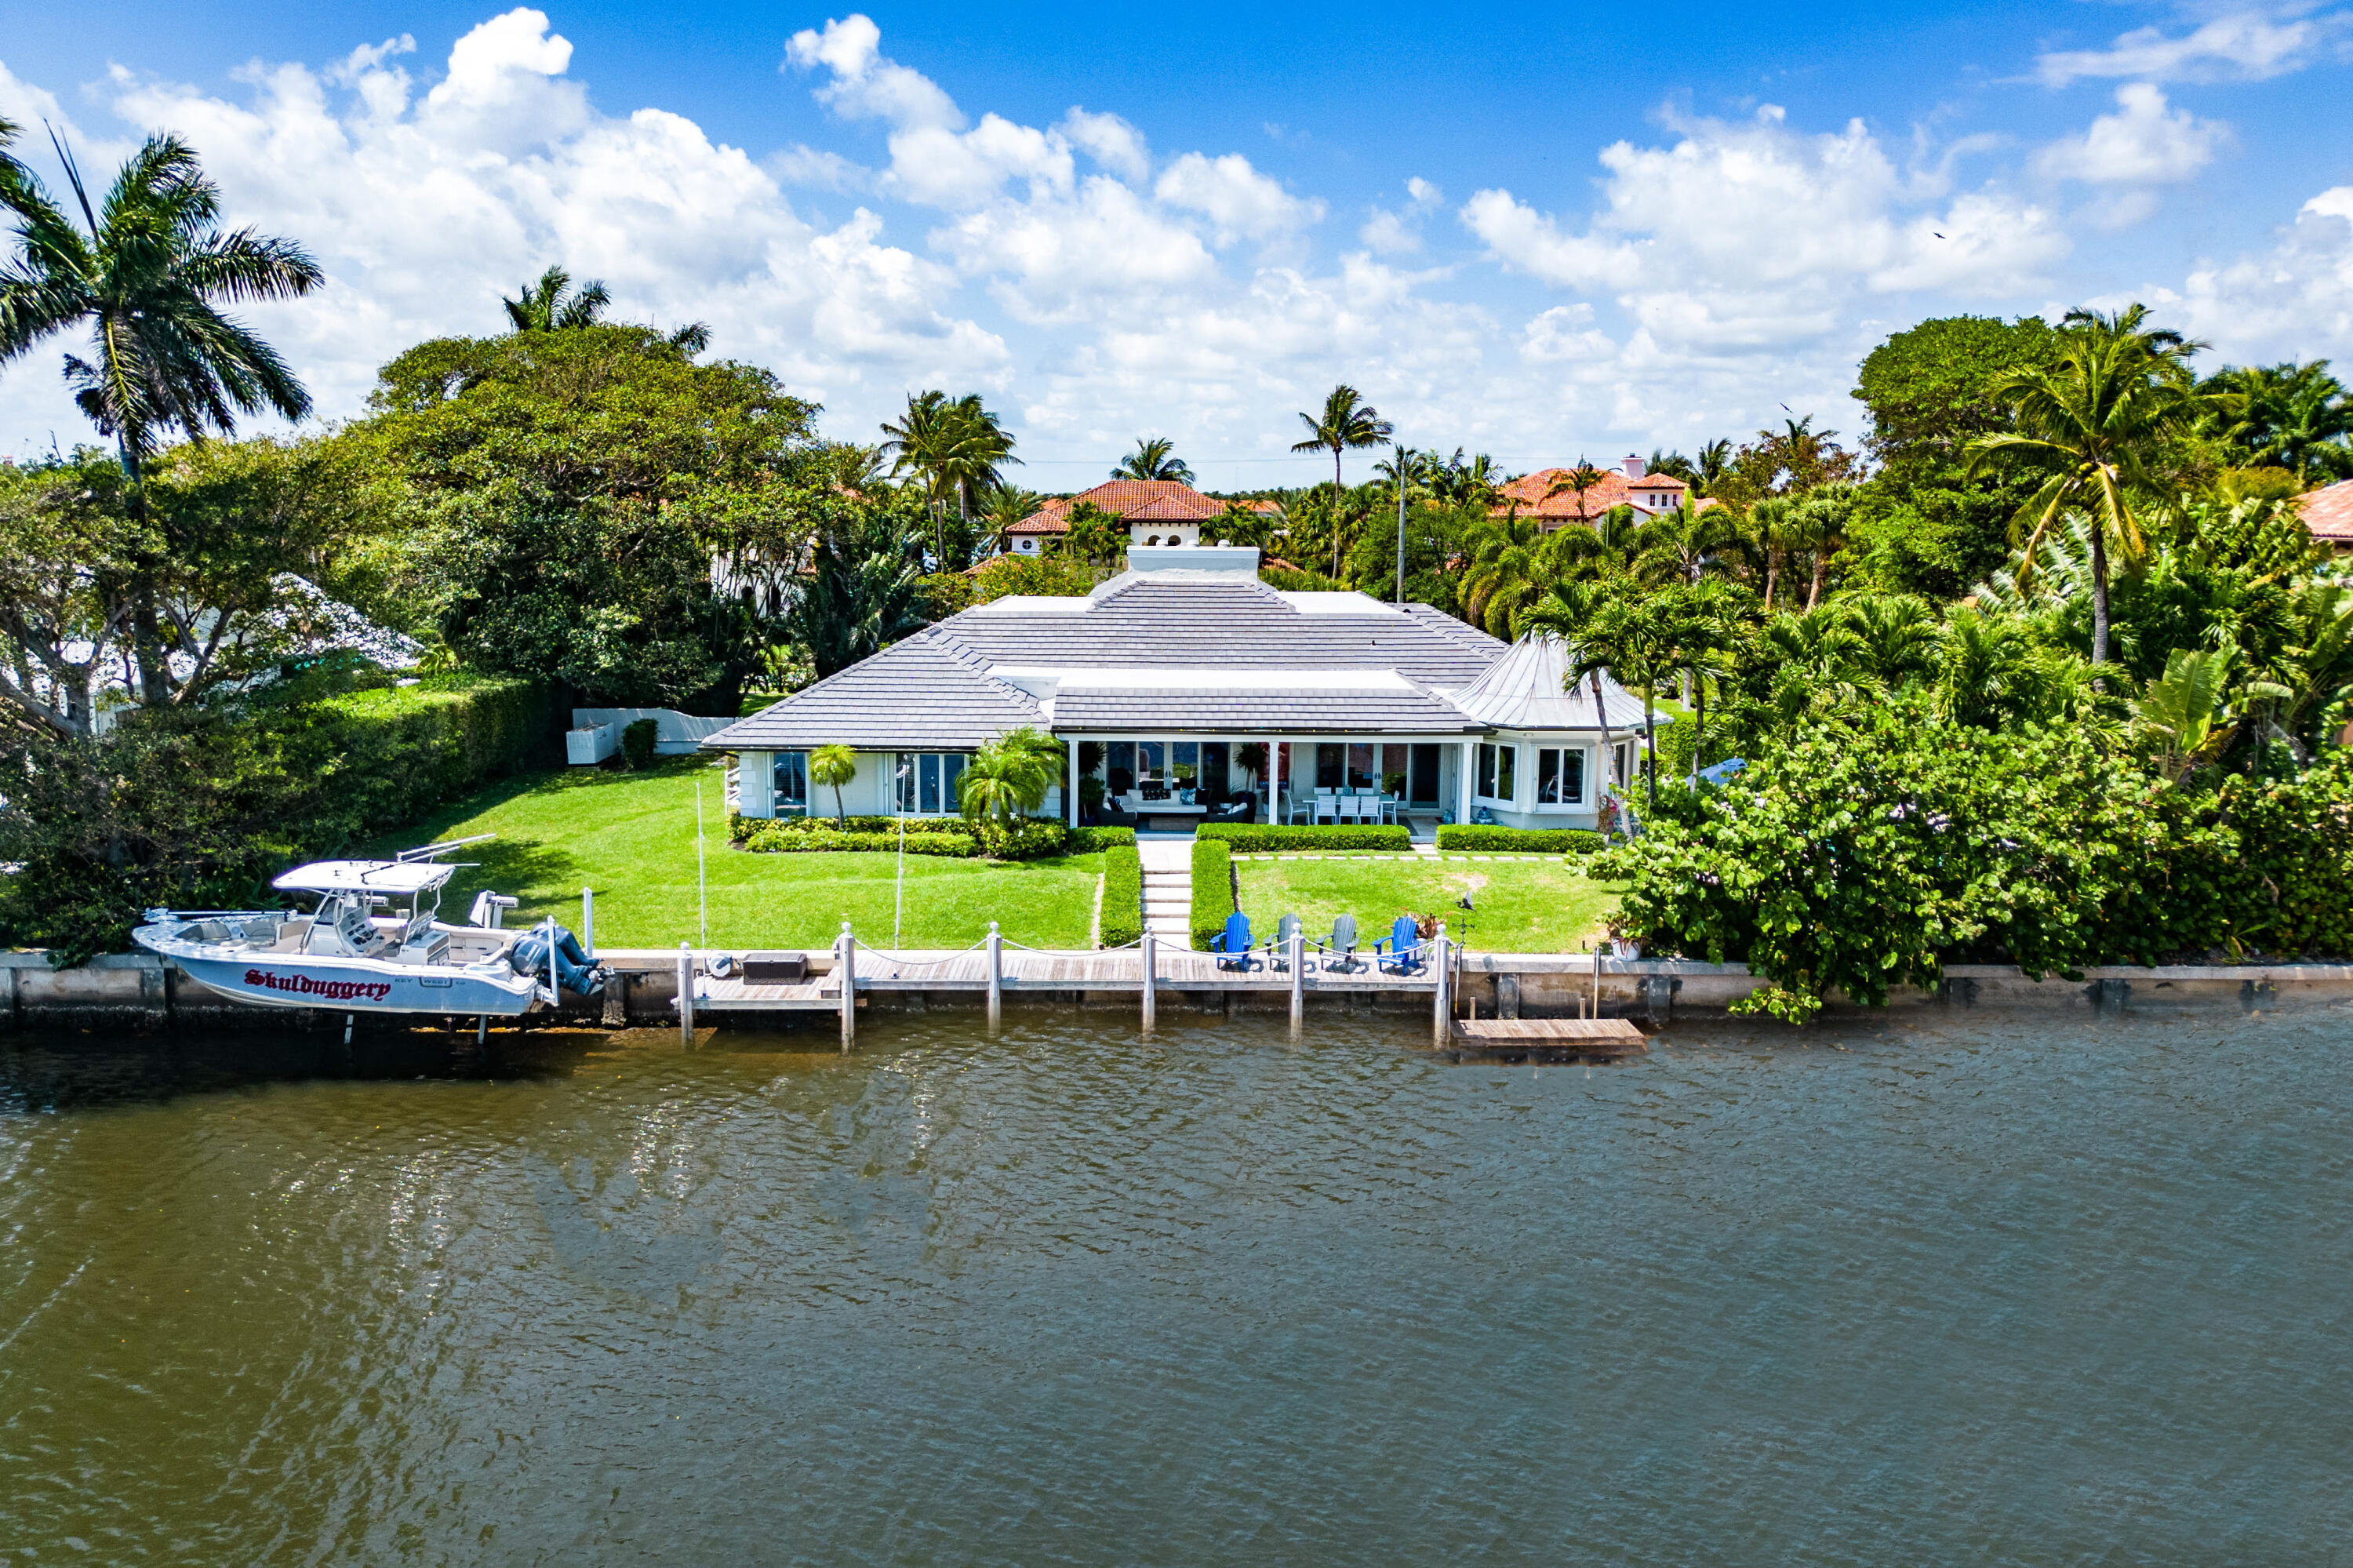 1400 Lands End Road, Manalapan, Palm Beach County, Florida - 4 Bedrooms  
4.5 Bathrooms - 